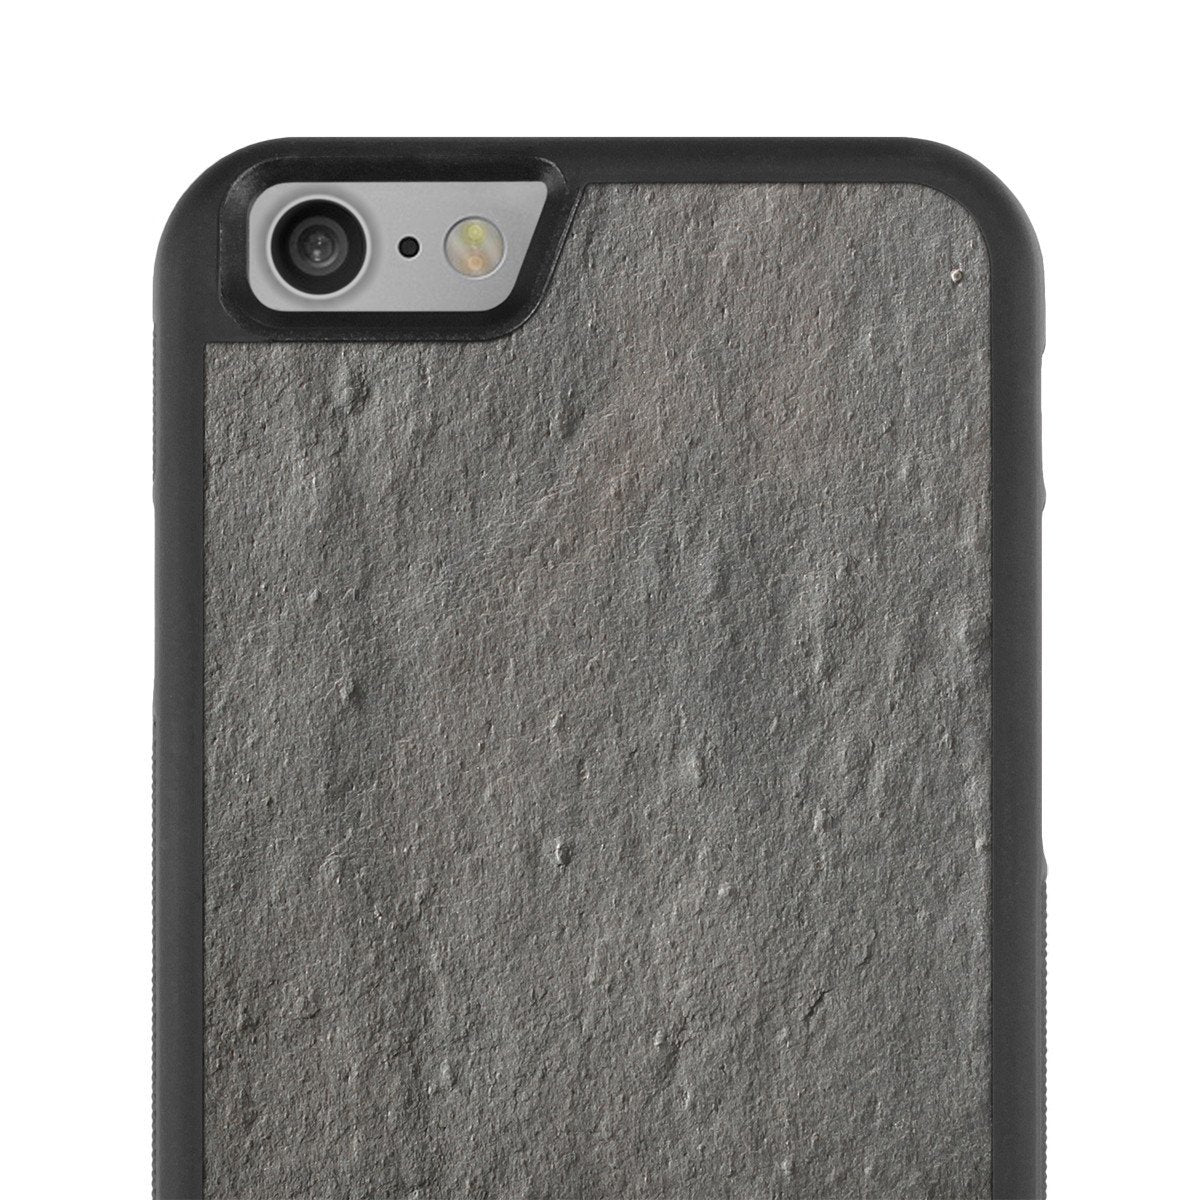  iPhone 7 —  Stone Explorer Case - Cover-Up - 5